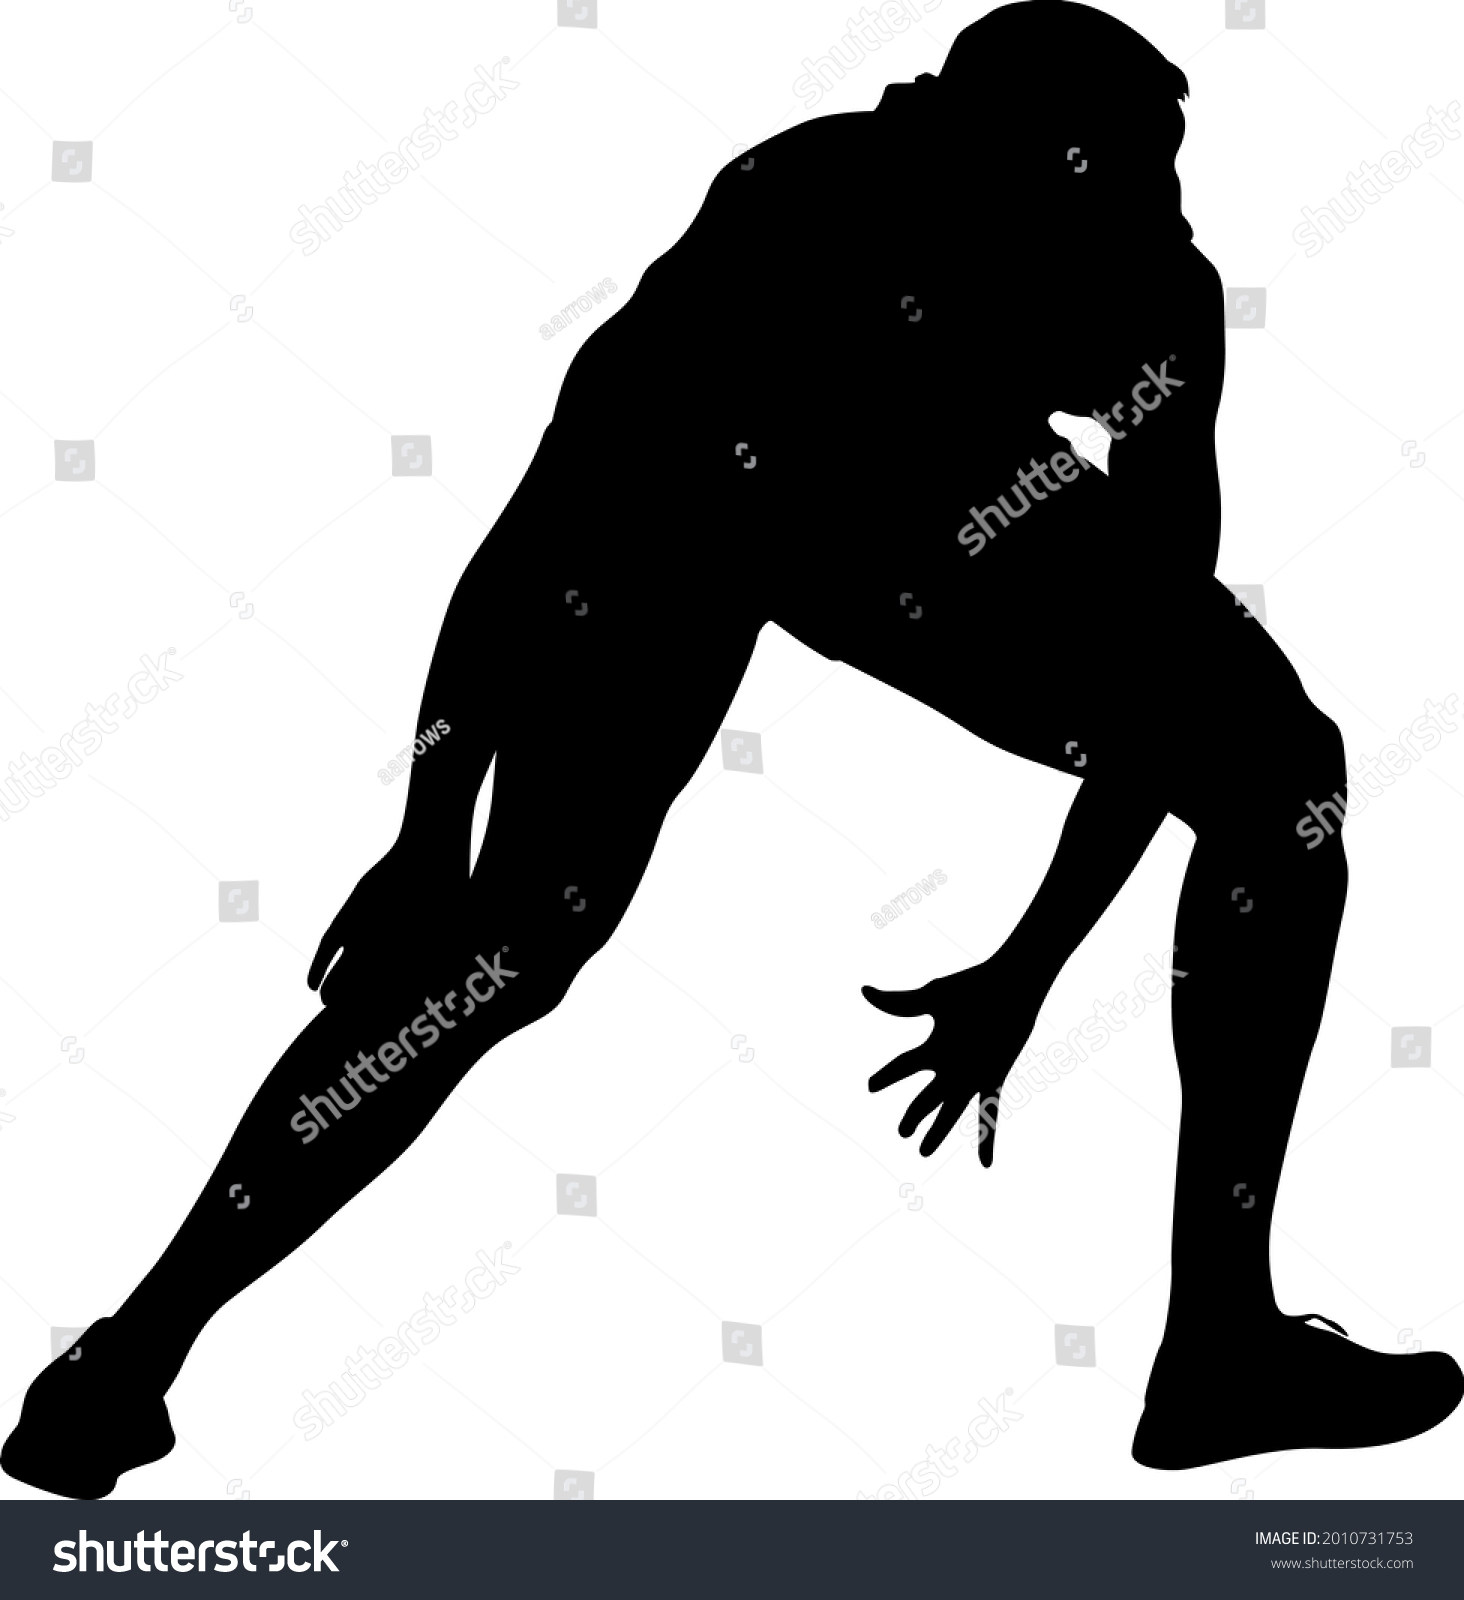 Silhouette People Different Poses Bent Over Stock Vector Royalty Free 2010731753 Shutterstock 